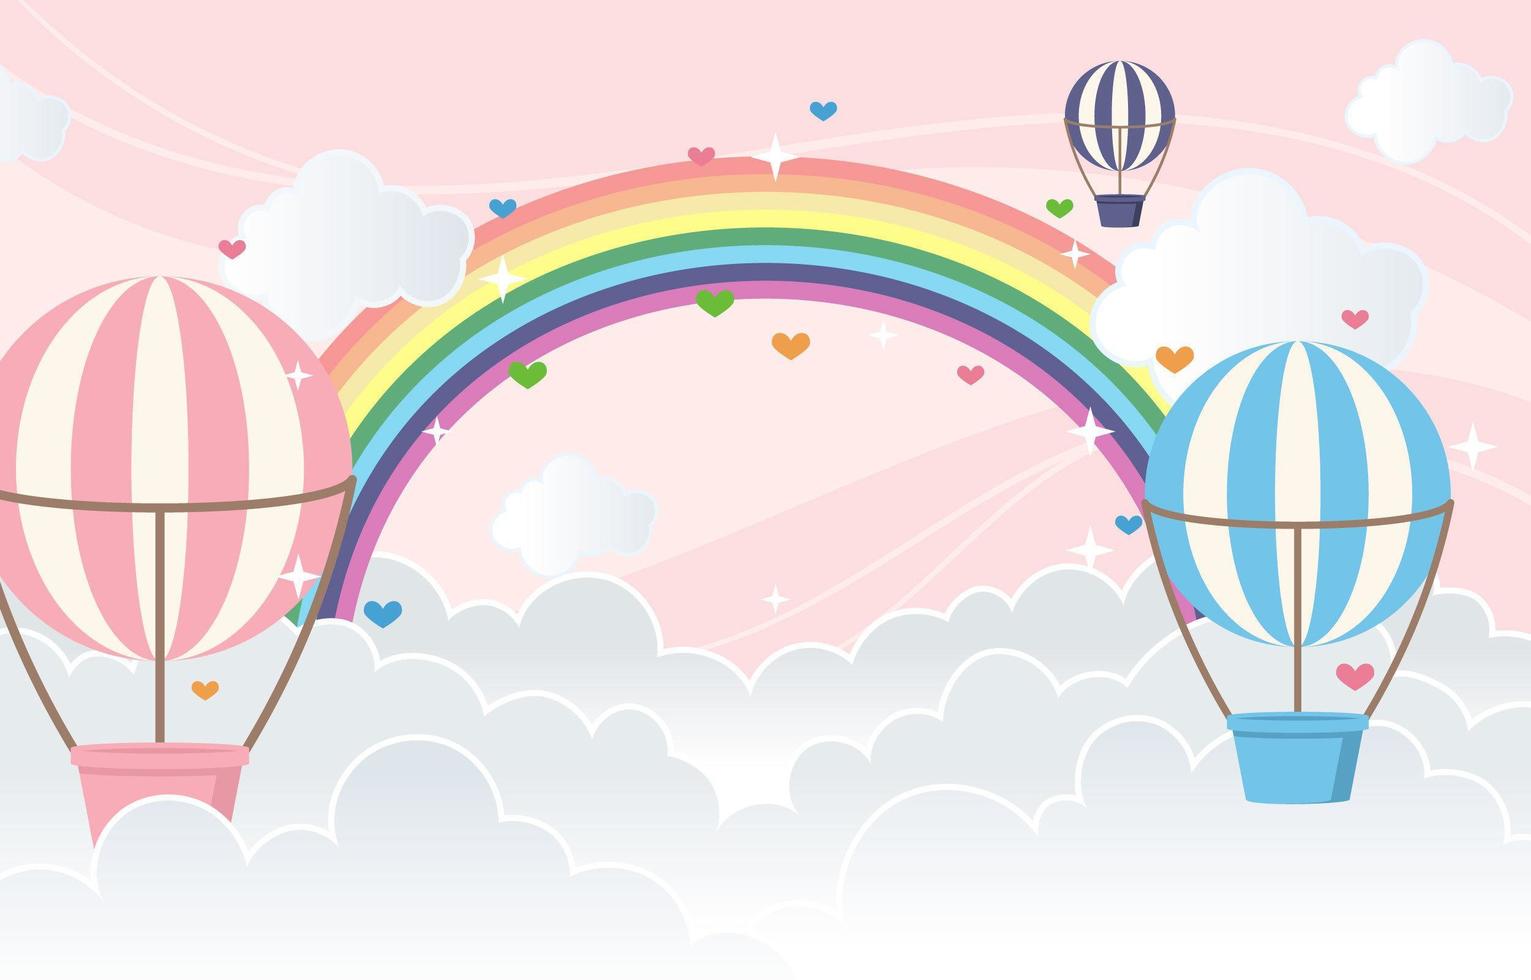 Air Balloon with Colorful Rainbow Background vector